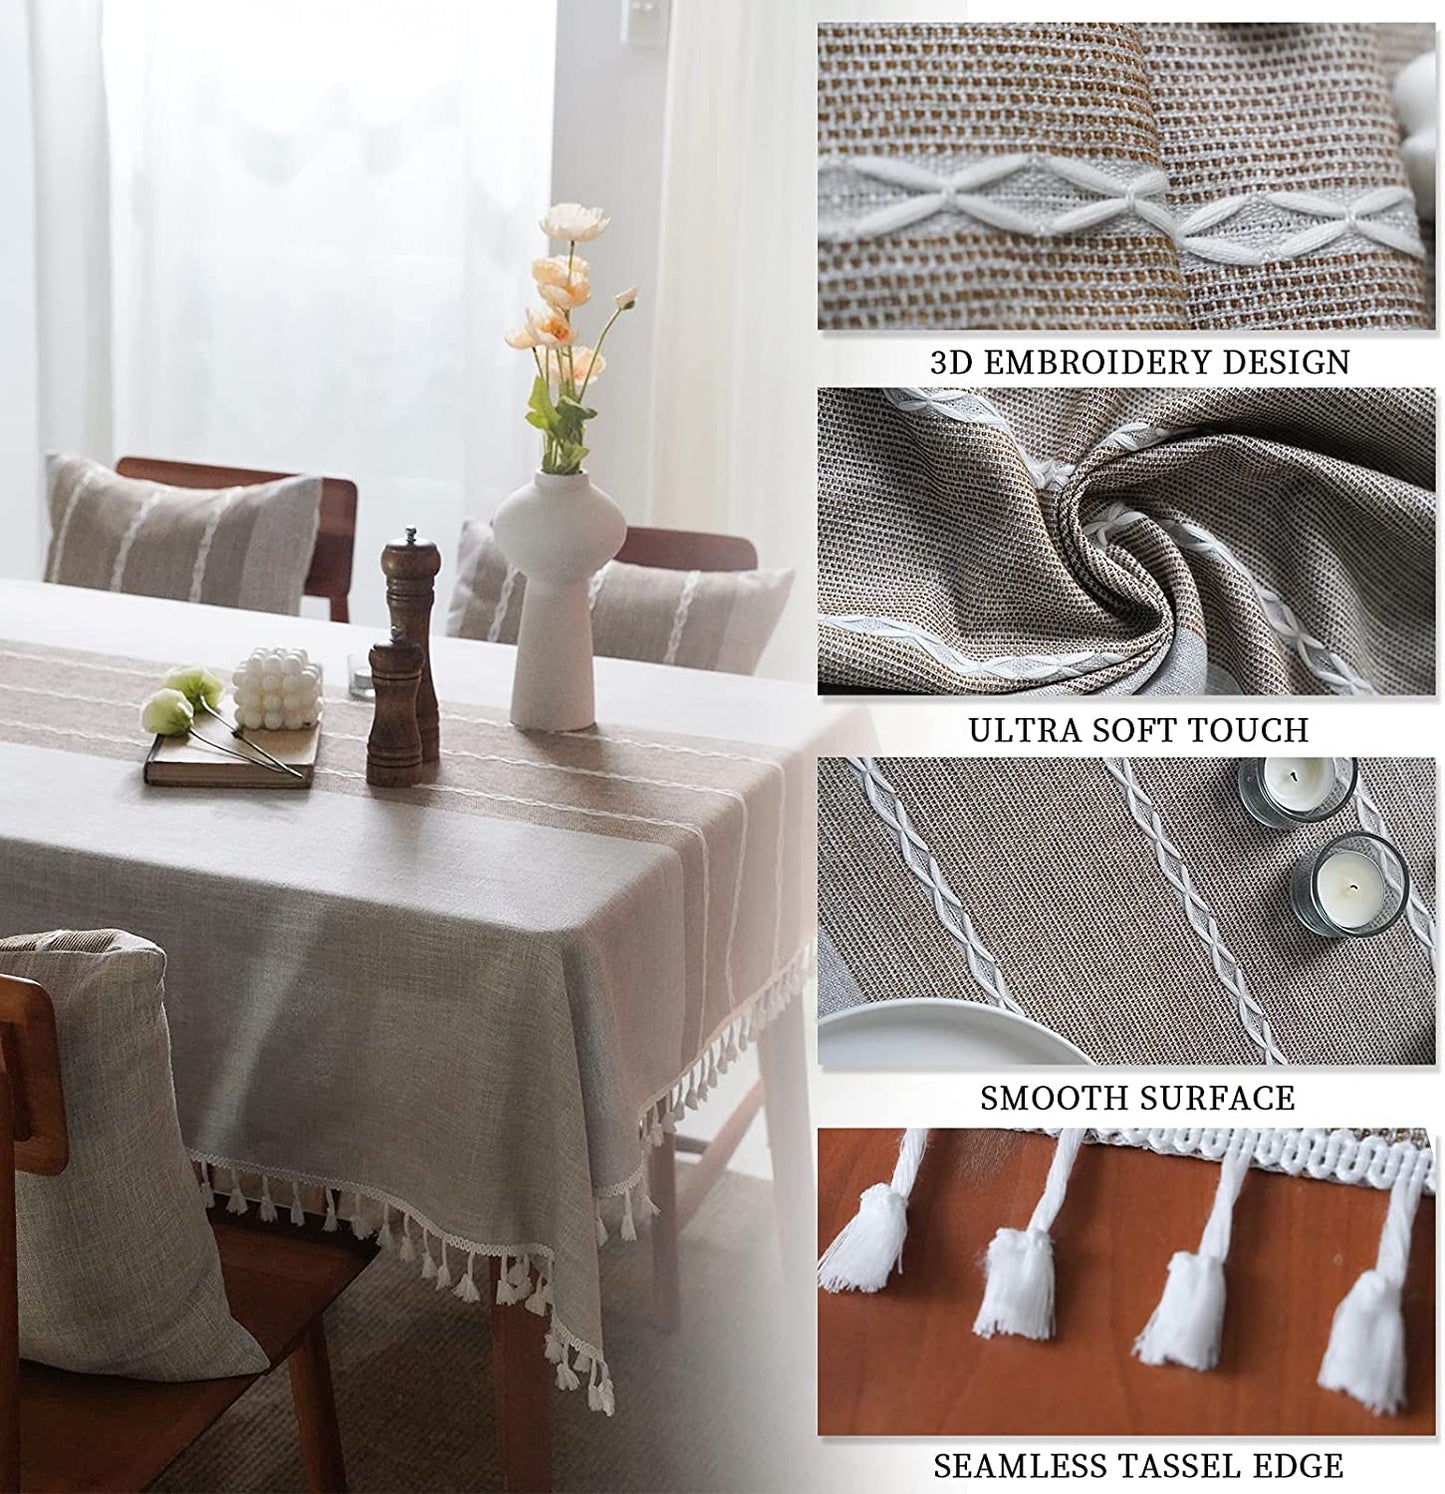 Mokani Middle Embroidery Table Cloth Washable Cotton Linen Tassel Tablecloth, Rectangle Wrinkle Free Anti-Fading Table Cover for Kitchen Dinning Thanksgiving Christmas (55 x 102 Inch, Brown) - (For 6 piece(s))